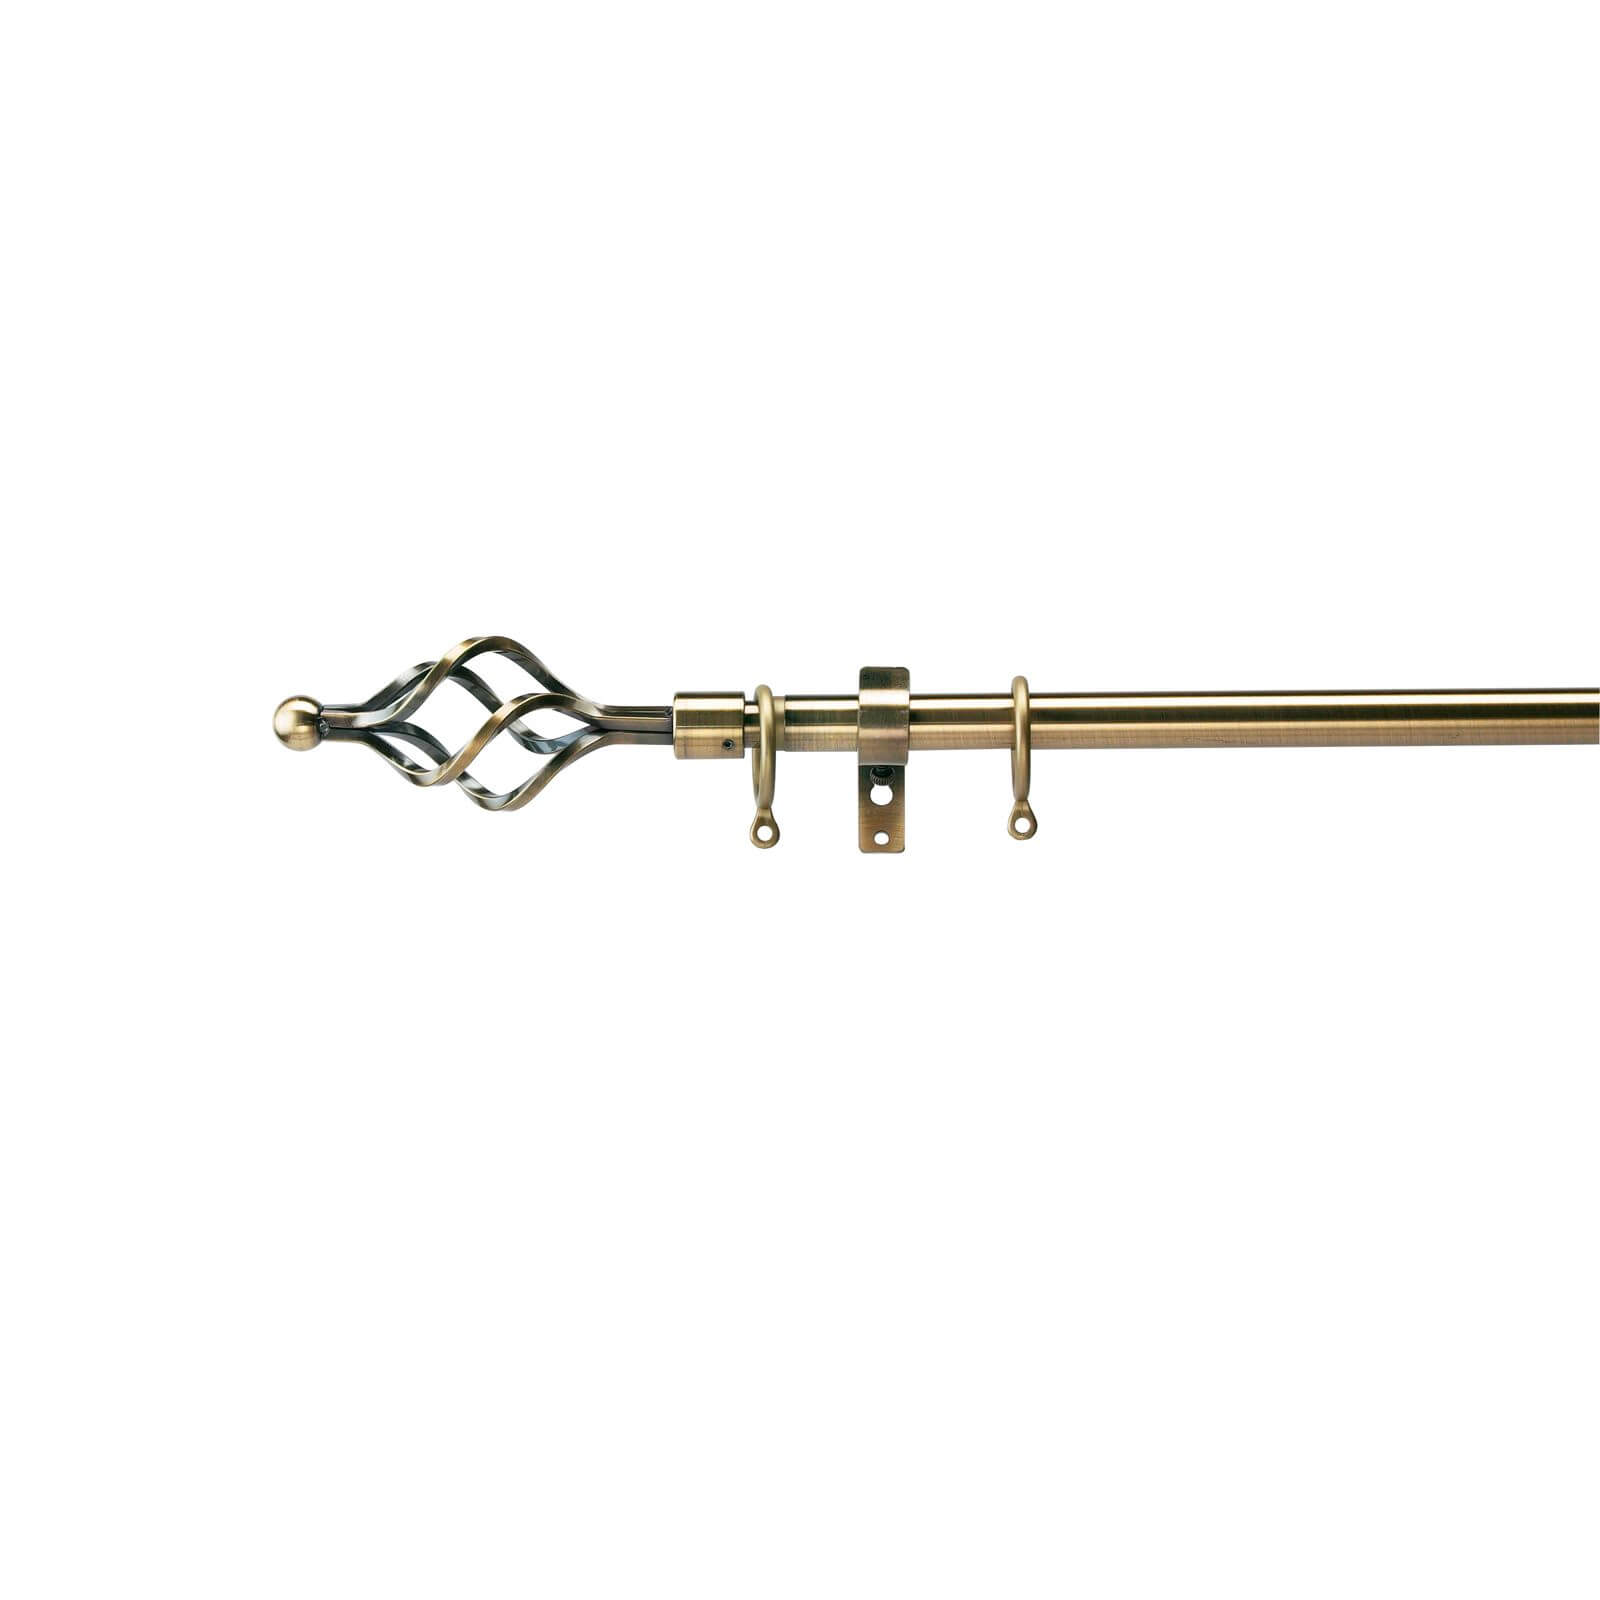 Extendable Cage Finial Curtain Pole - Antique Brass - 1.7-3m (16/19mm)